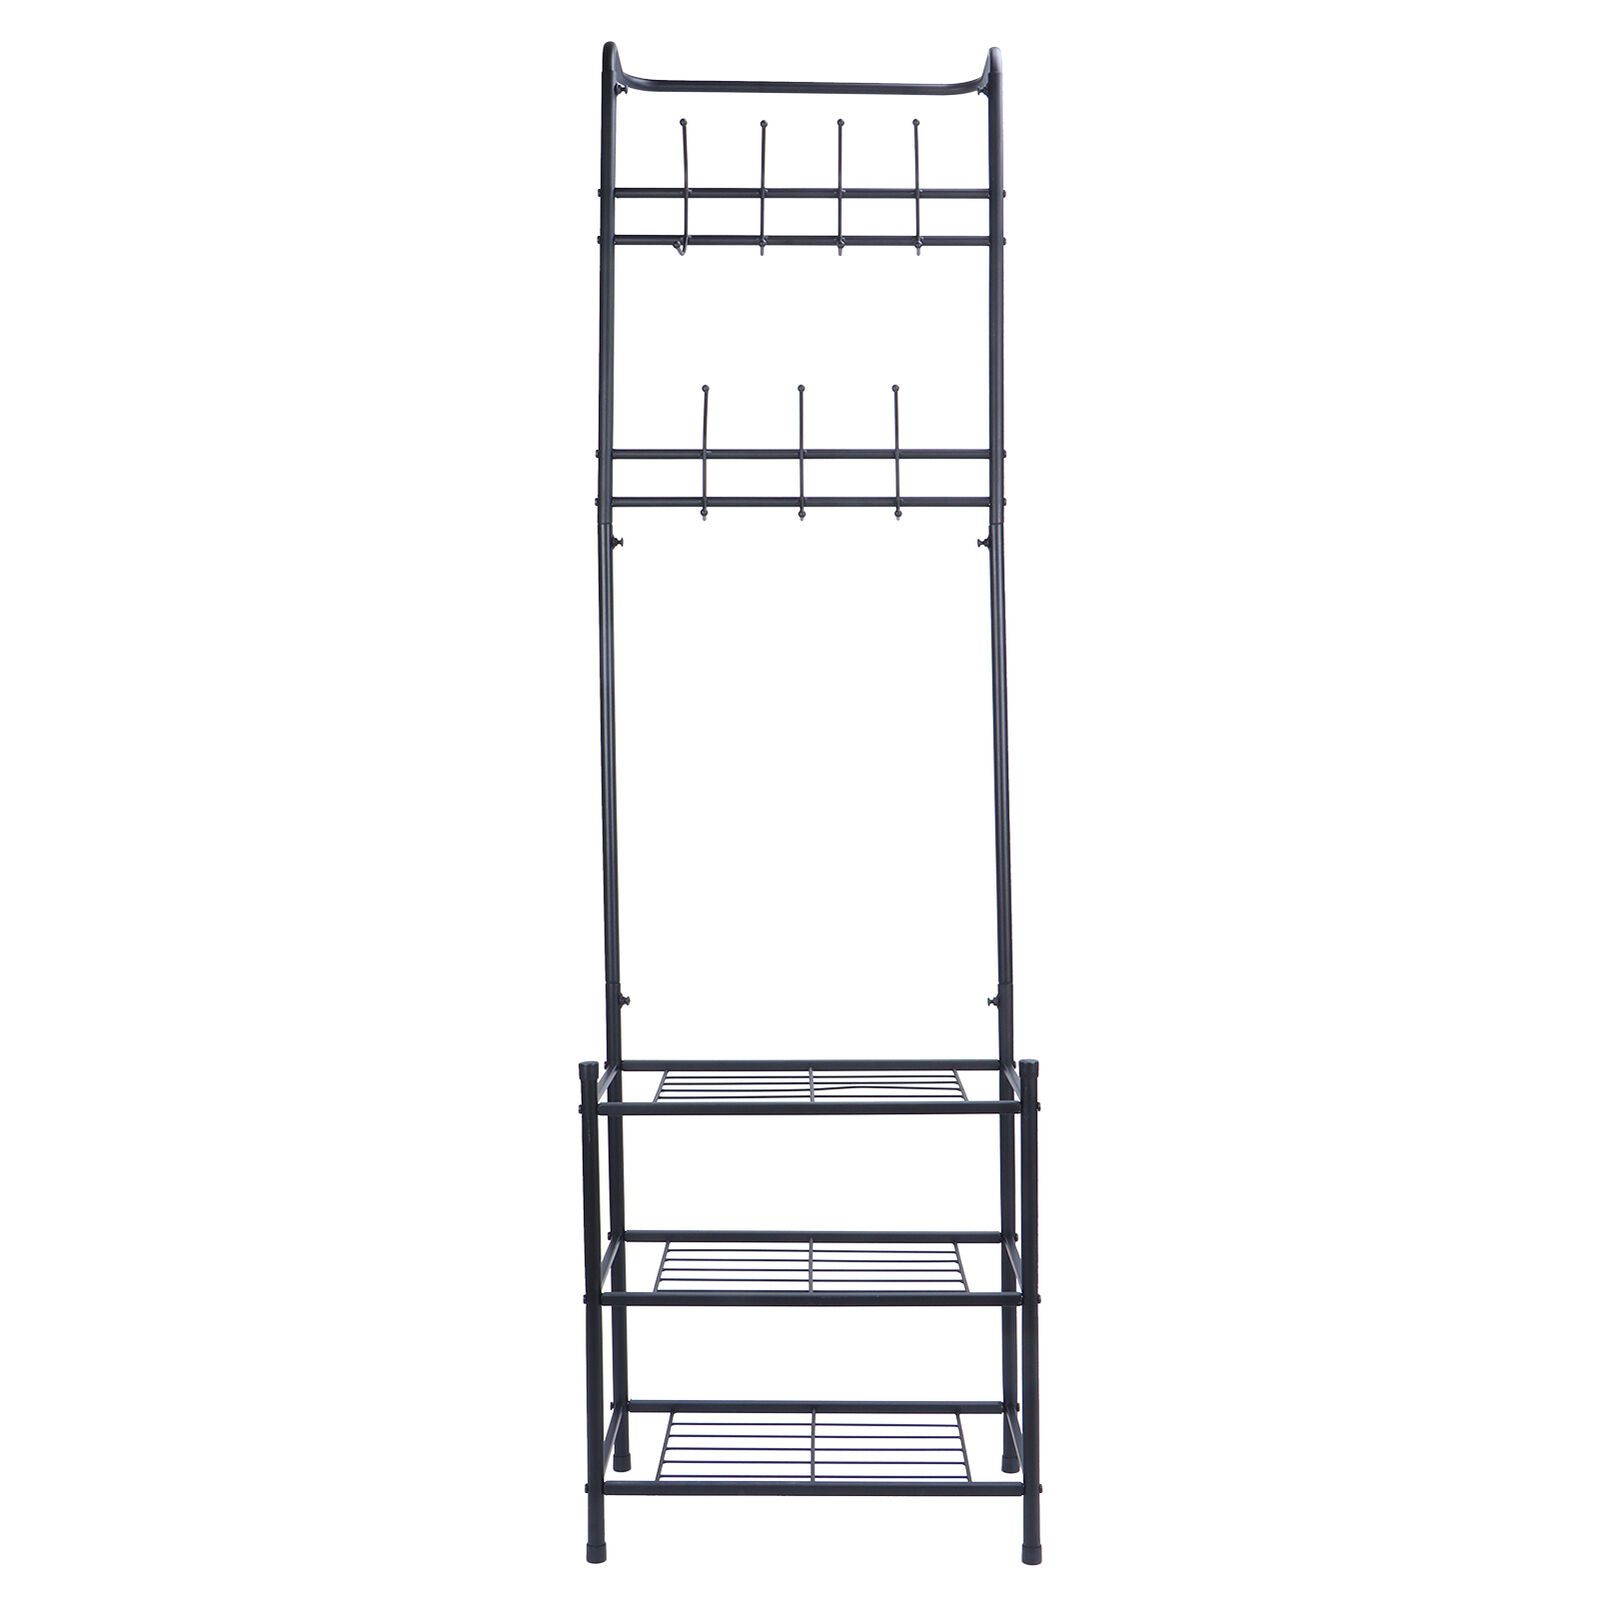 Shoe Rack Multi-purpose Storage Organizer Save Your Space for Home